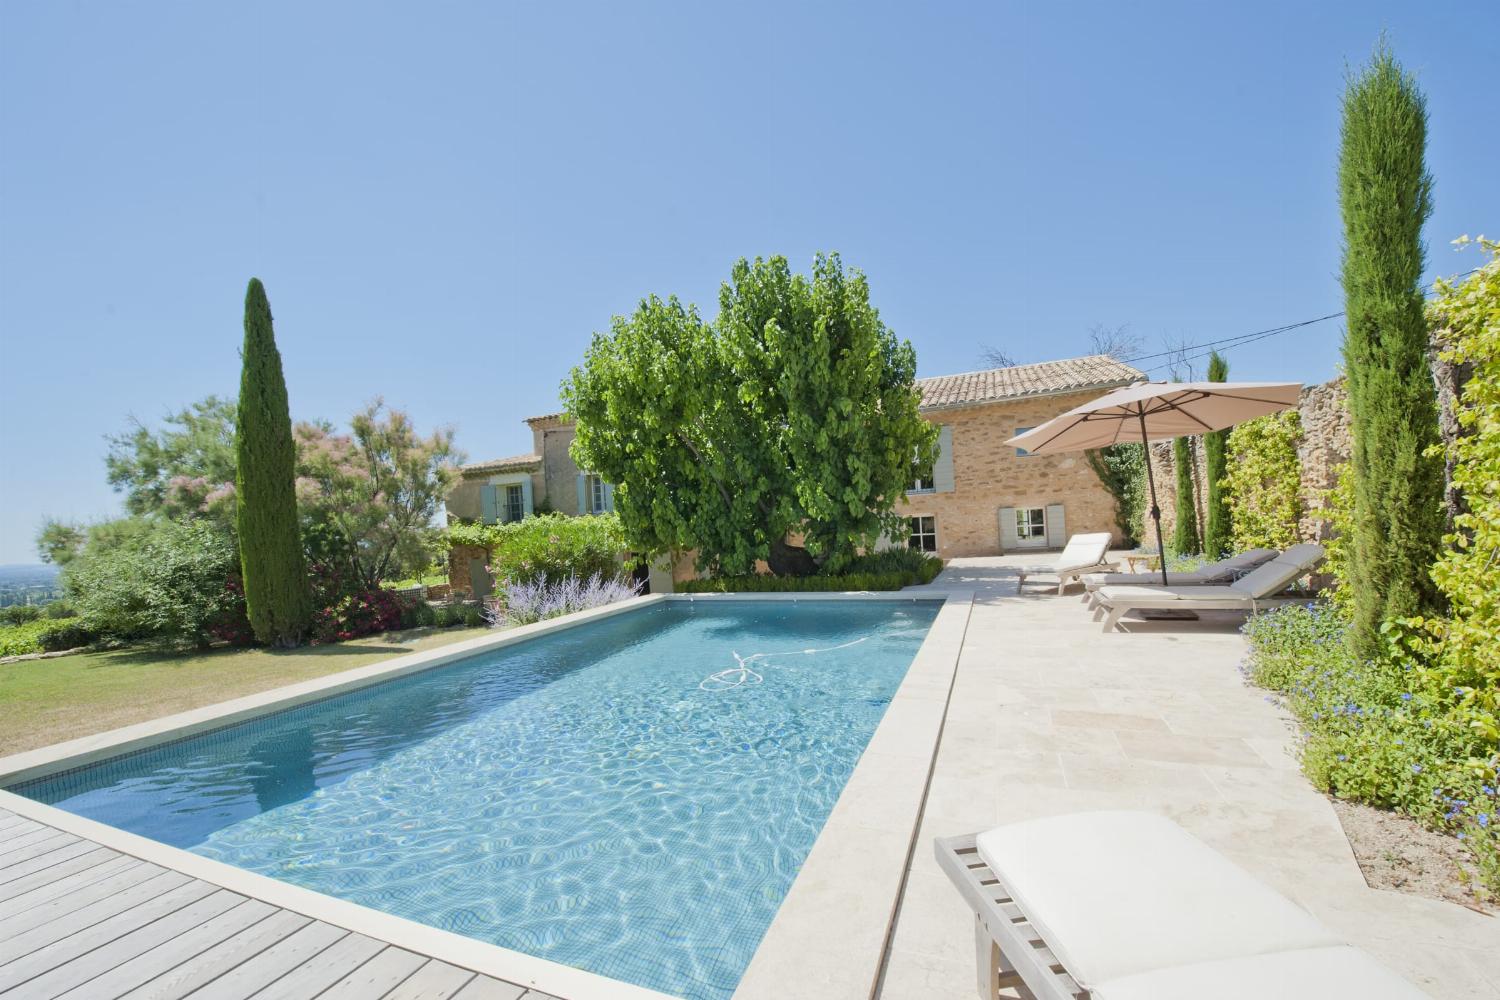 Self-catering home in Provence with private heated pool